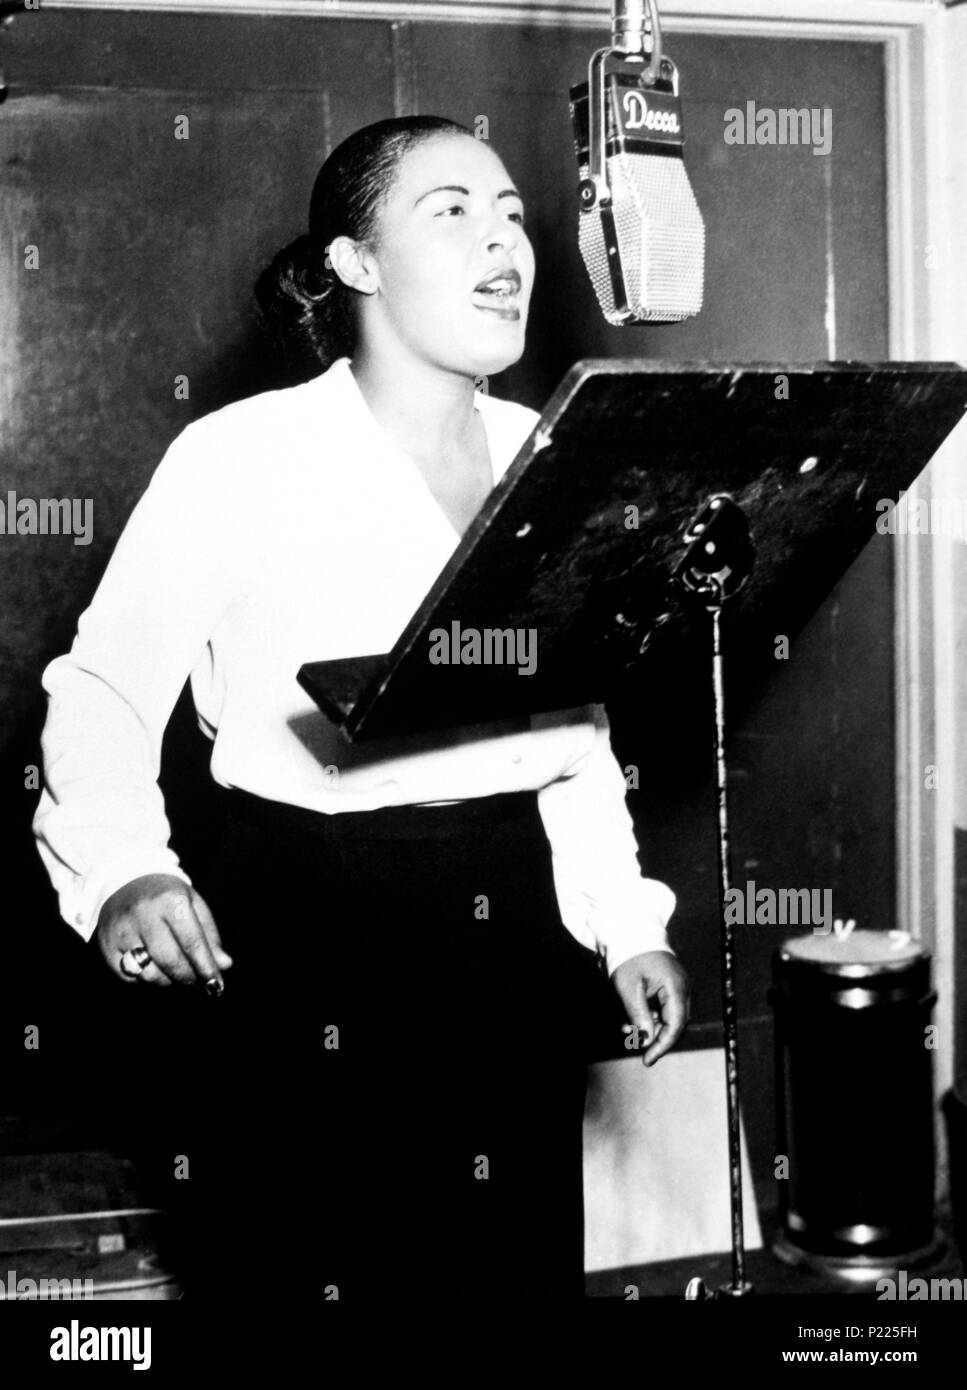 American jazz singer Billie Holiday singing into a microphone at a Decca  recording session, 1946 Stock Photo - Alamy